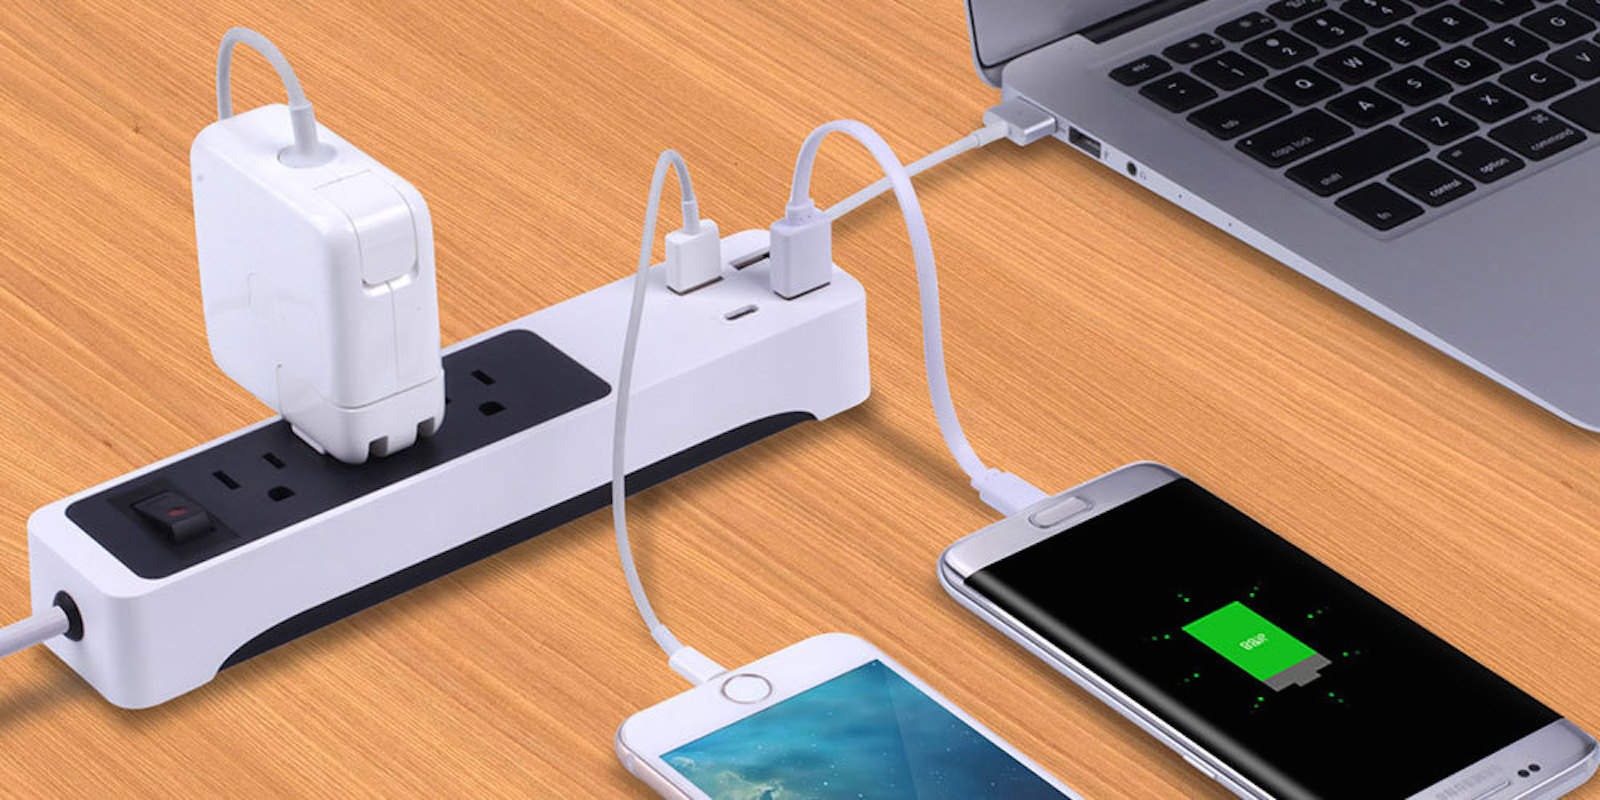 3 outlets and 4 USB ports make this travel-friendly power strip a comprehensive charging solution.